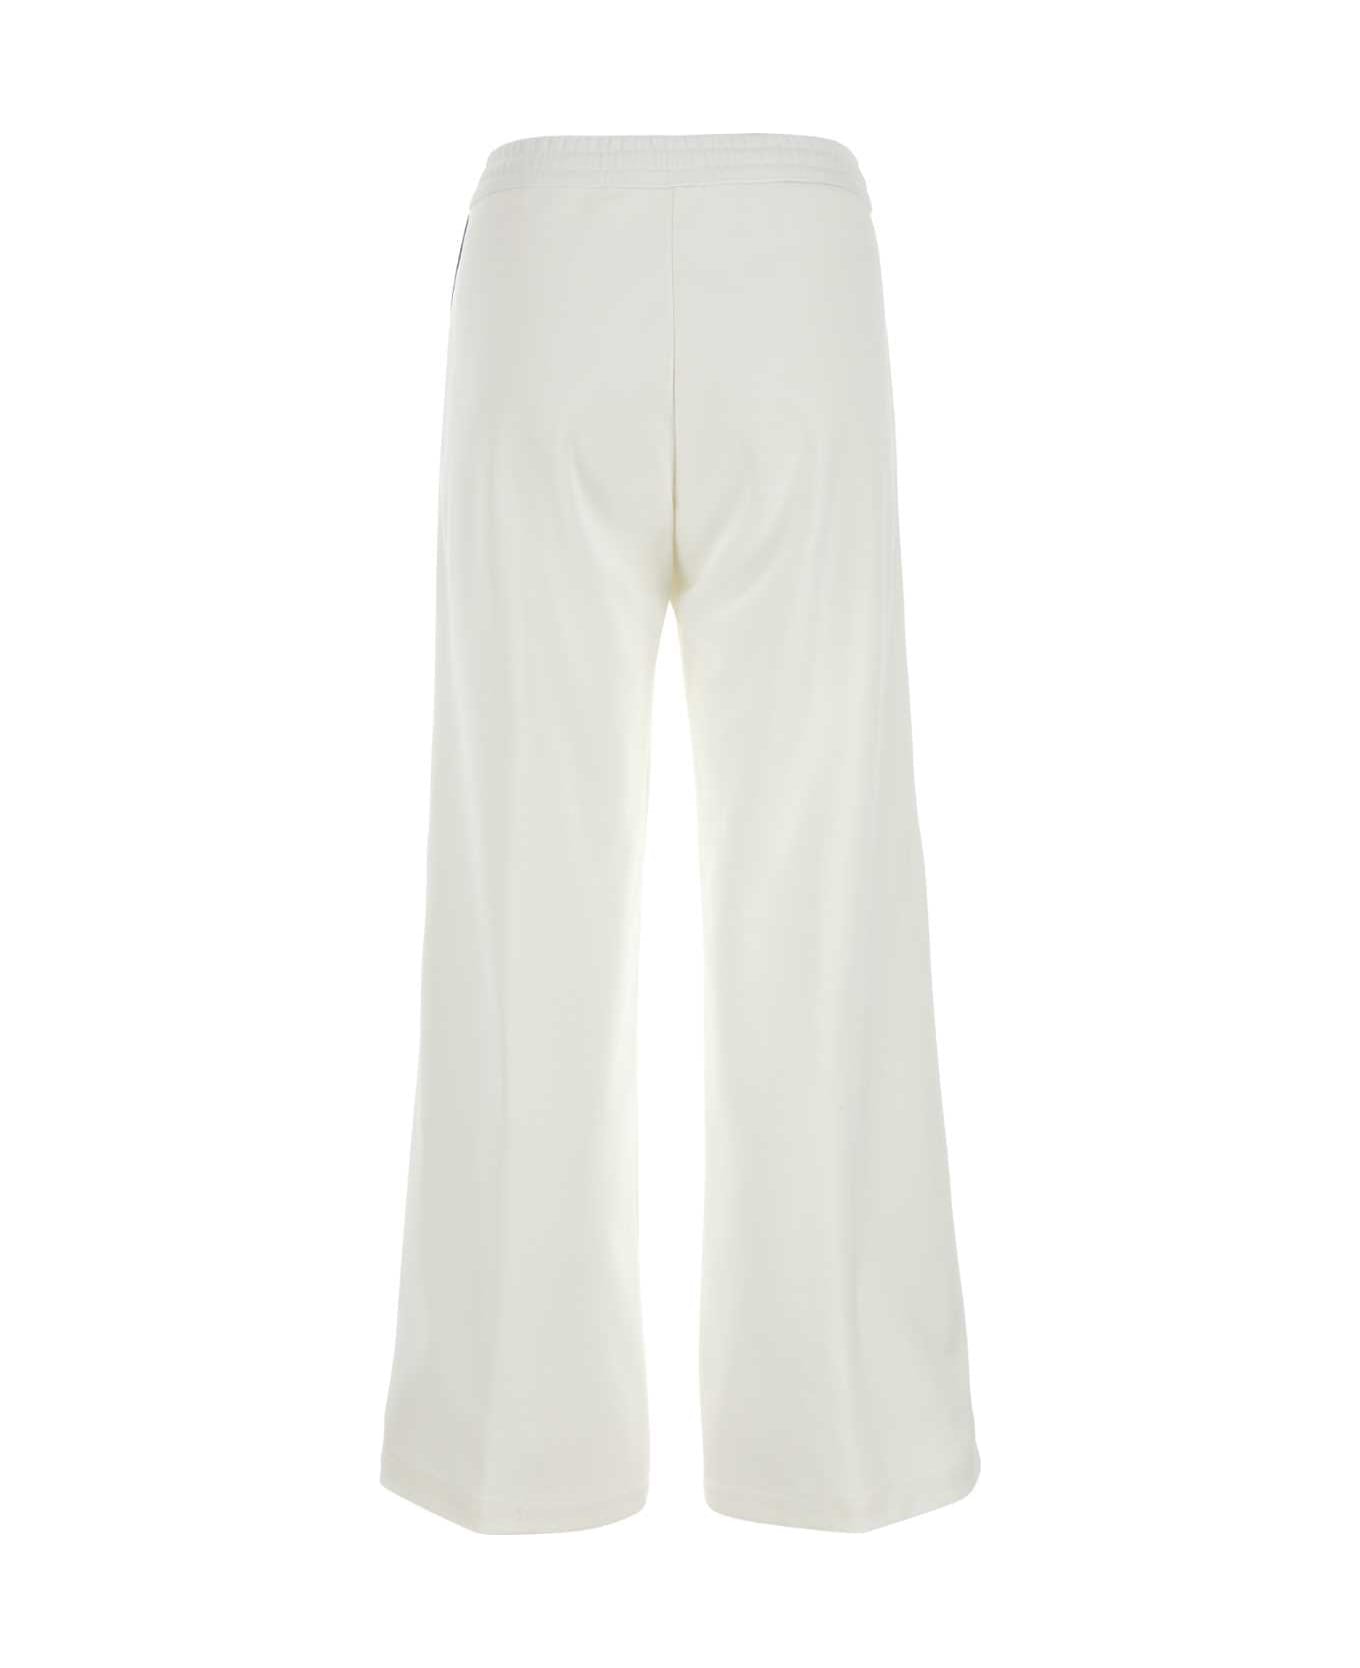 Gucci White Polyester Blend Pant - OFFWHITEFROZENMIX ボトムス